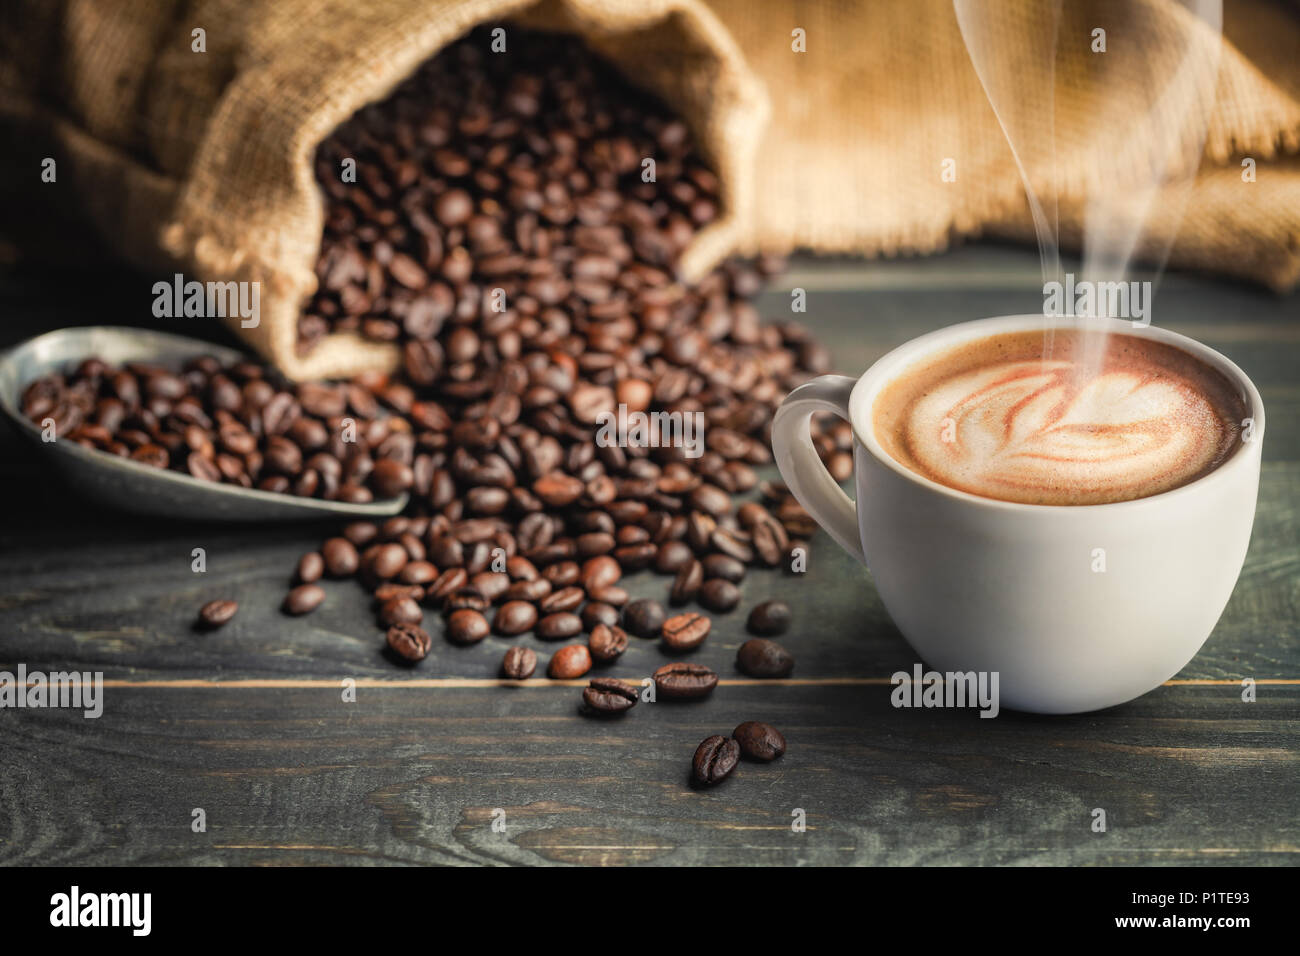 Coffee cup and coffee beans with bag, scoop and smoke - classic concept. Stock Photo